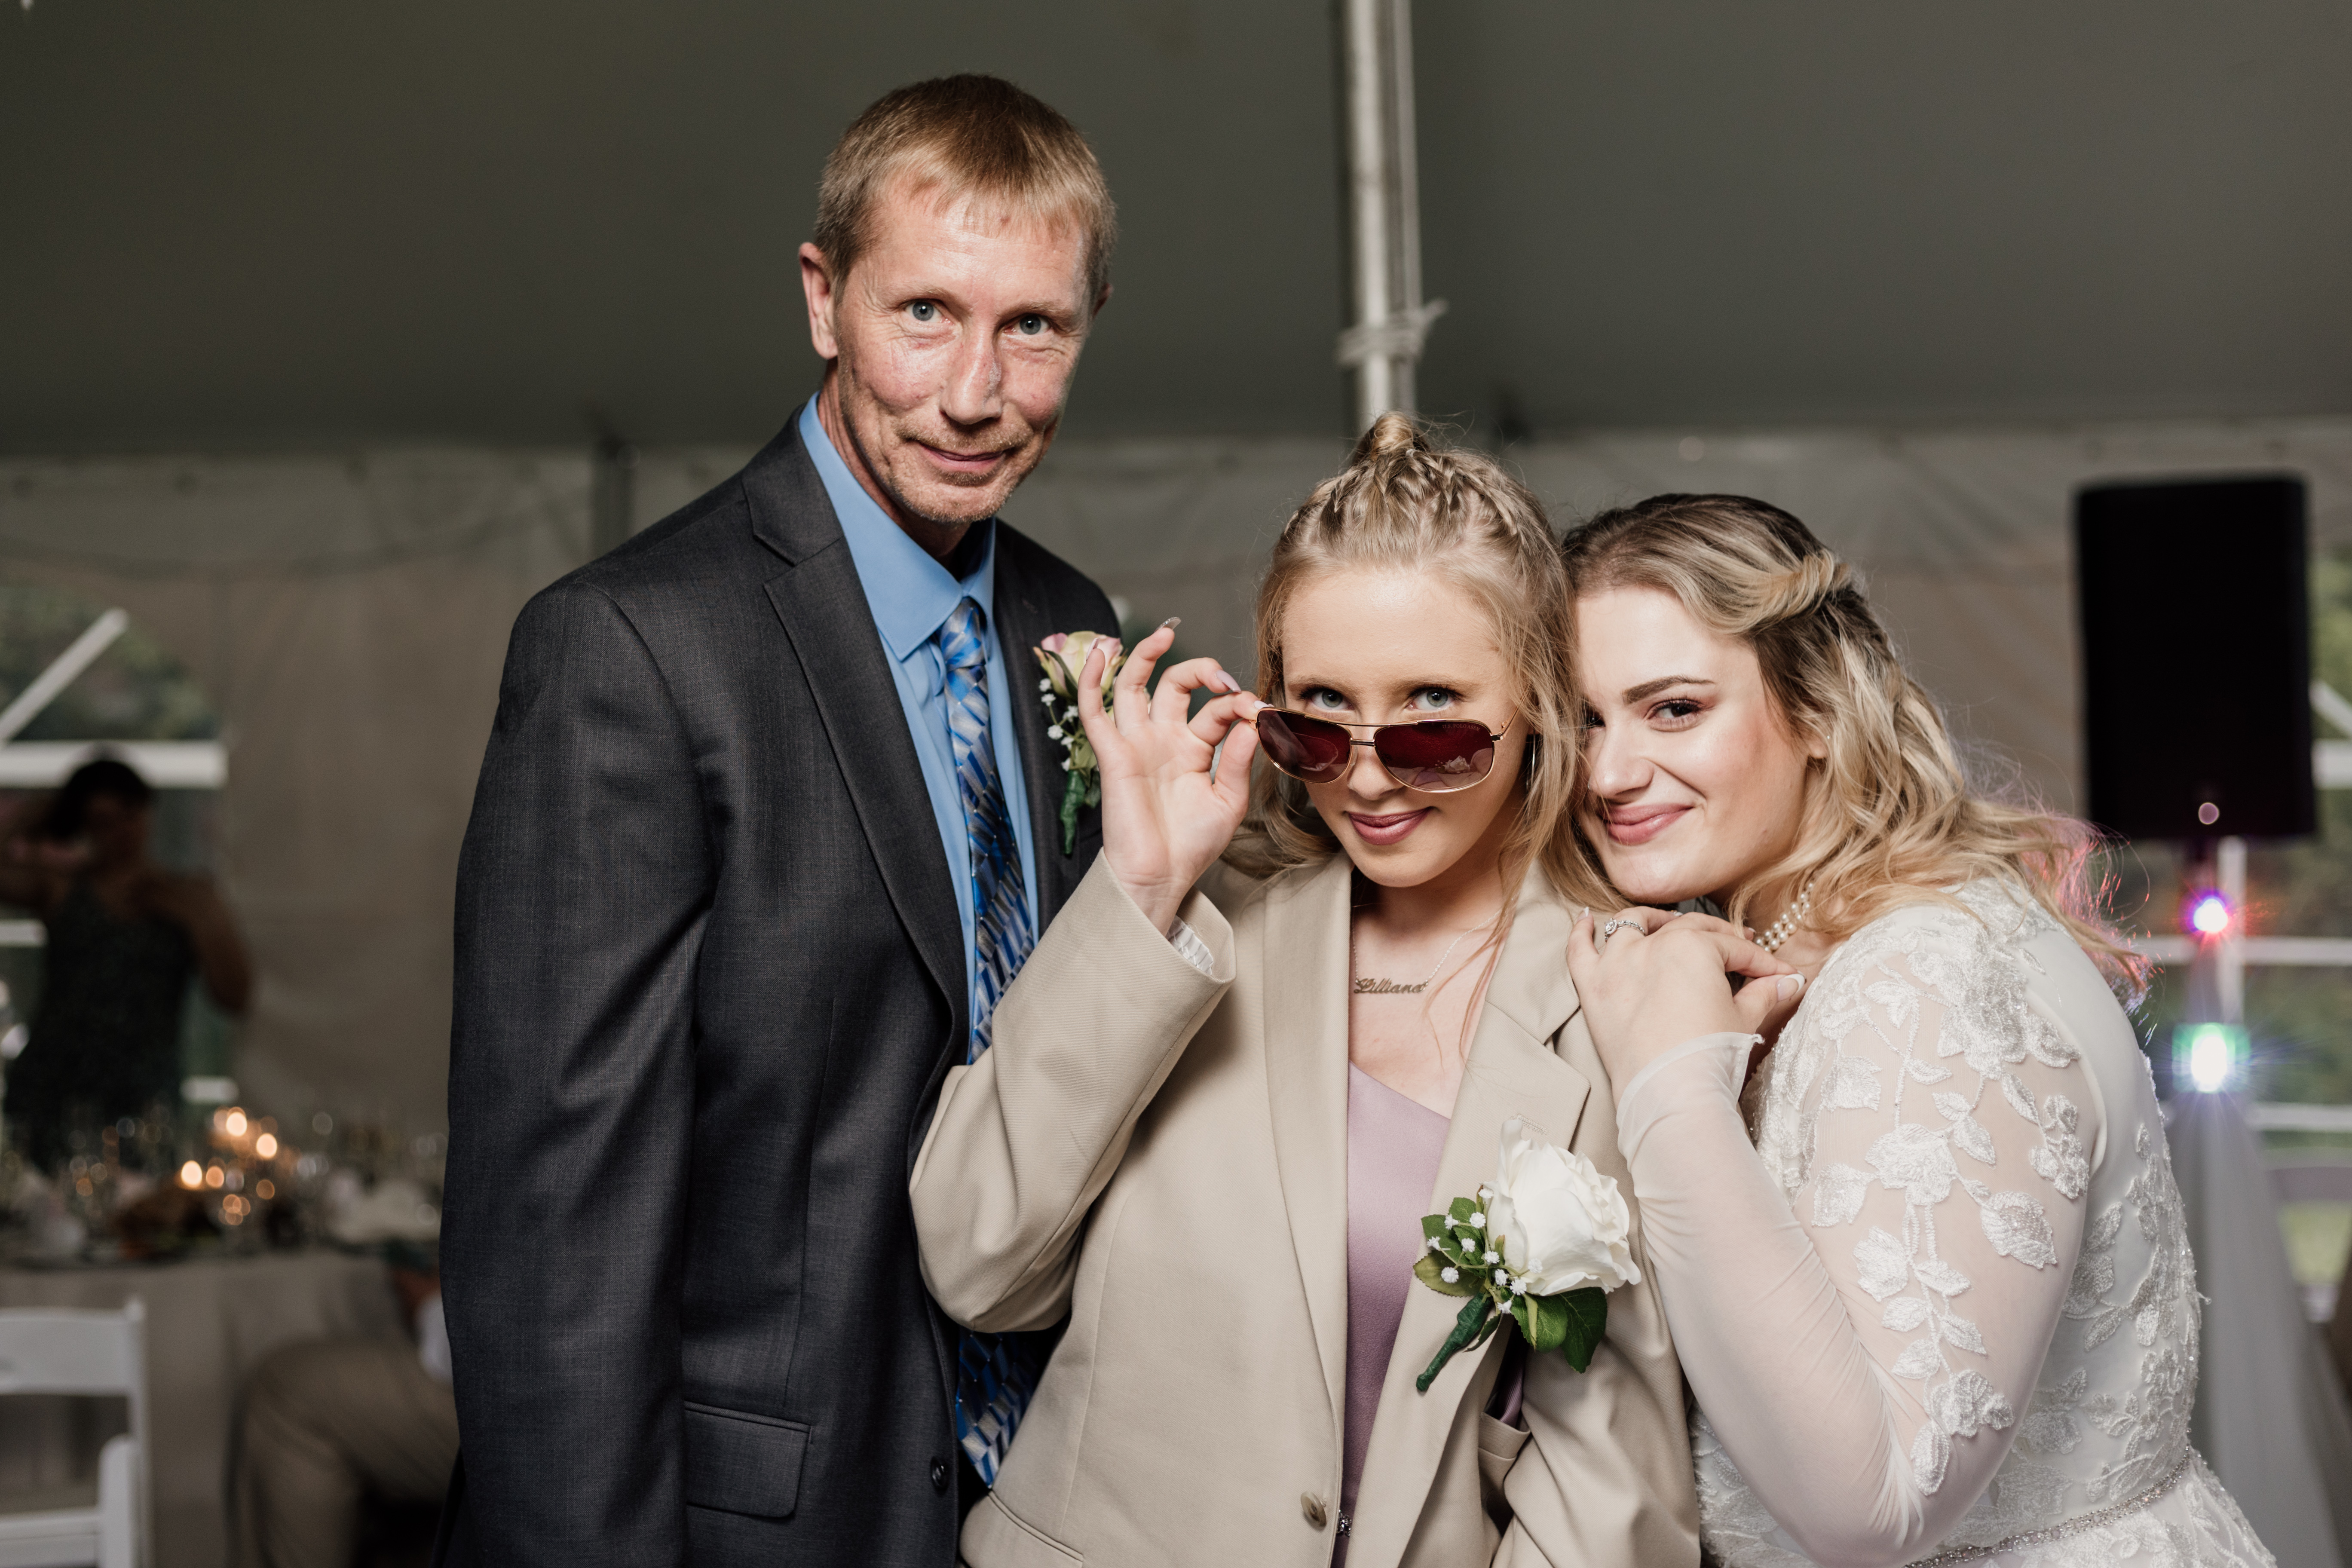 Fun family photograph at the reception of a spring wedding in Historic Odessa Delaware wedding venue, including the bride, sister of the groom with sunglasses indoors, and the father of the groom.